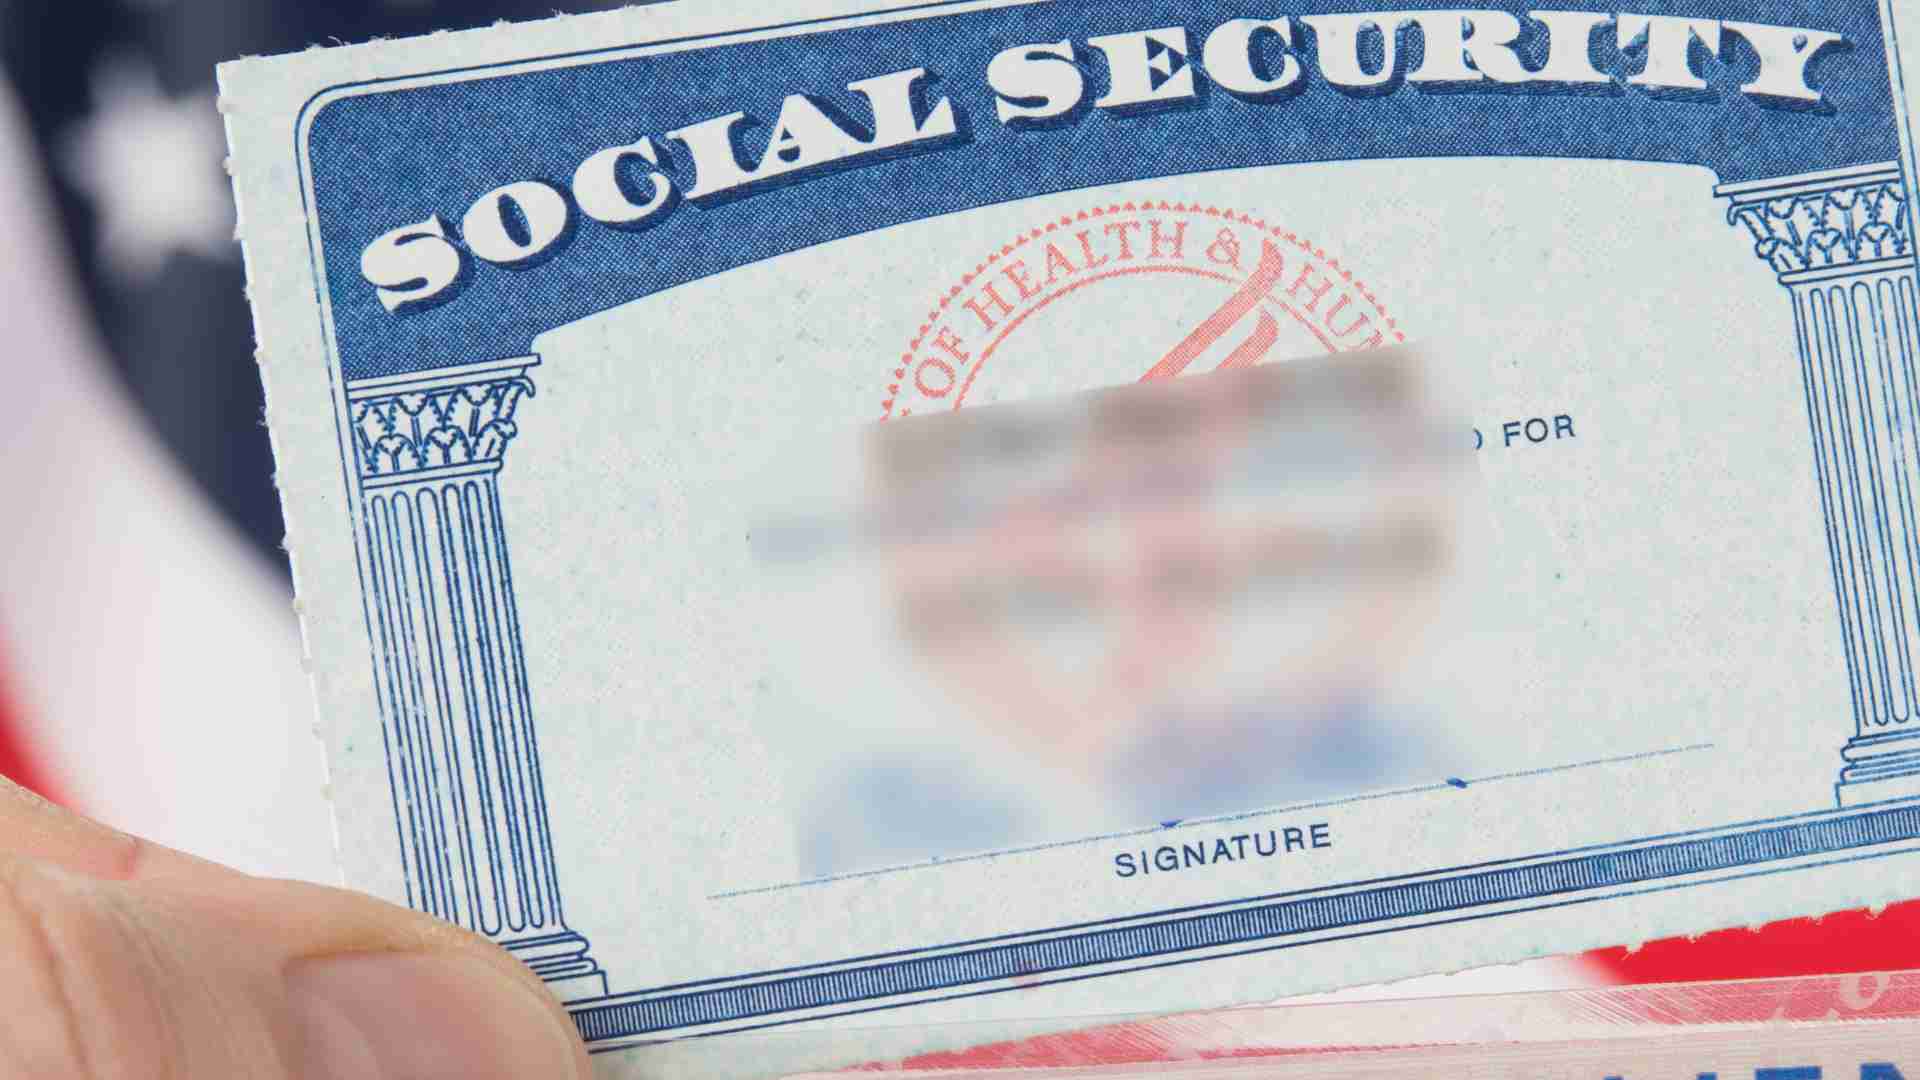 The Social Security Administration confirms payments worth $1,907 coming soon in the United States